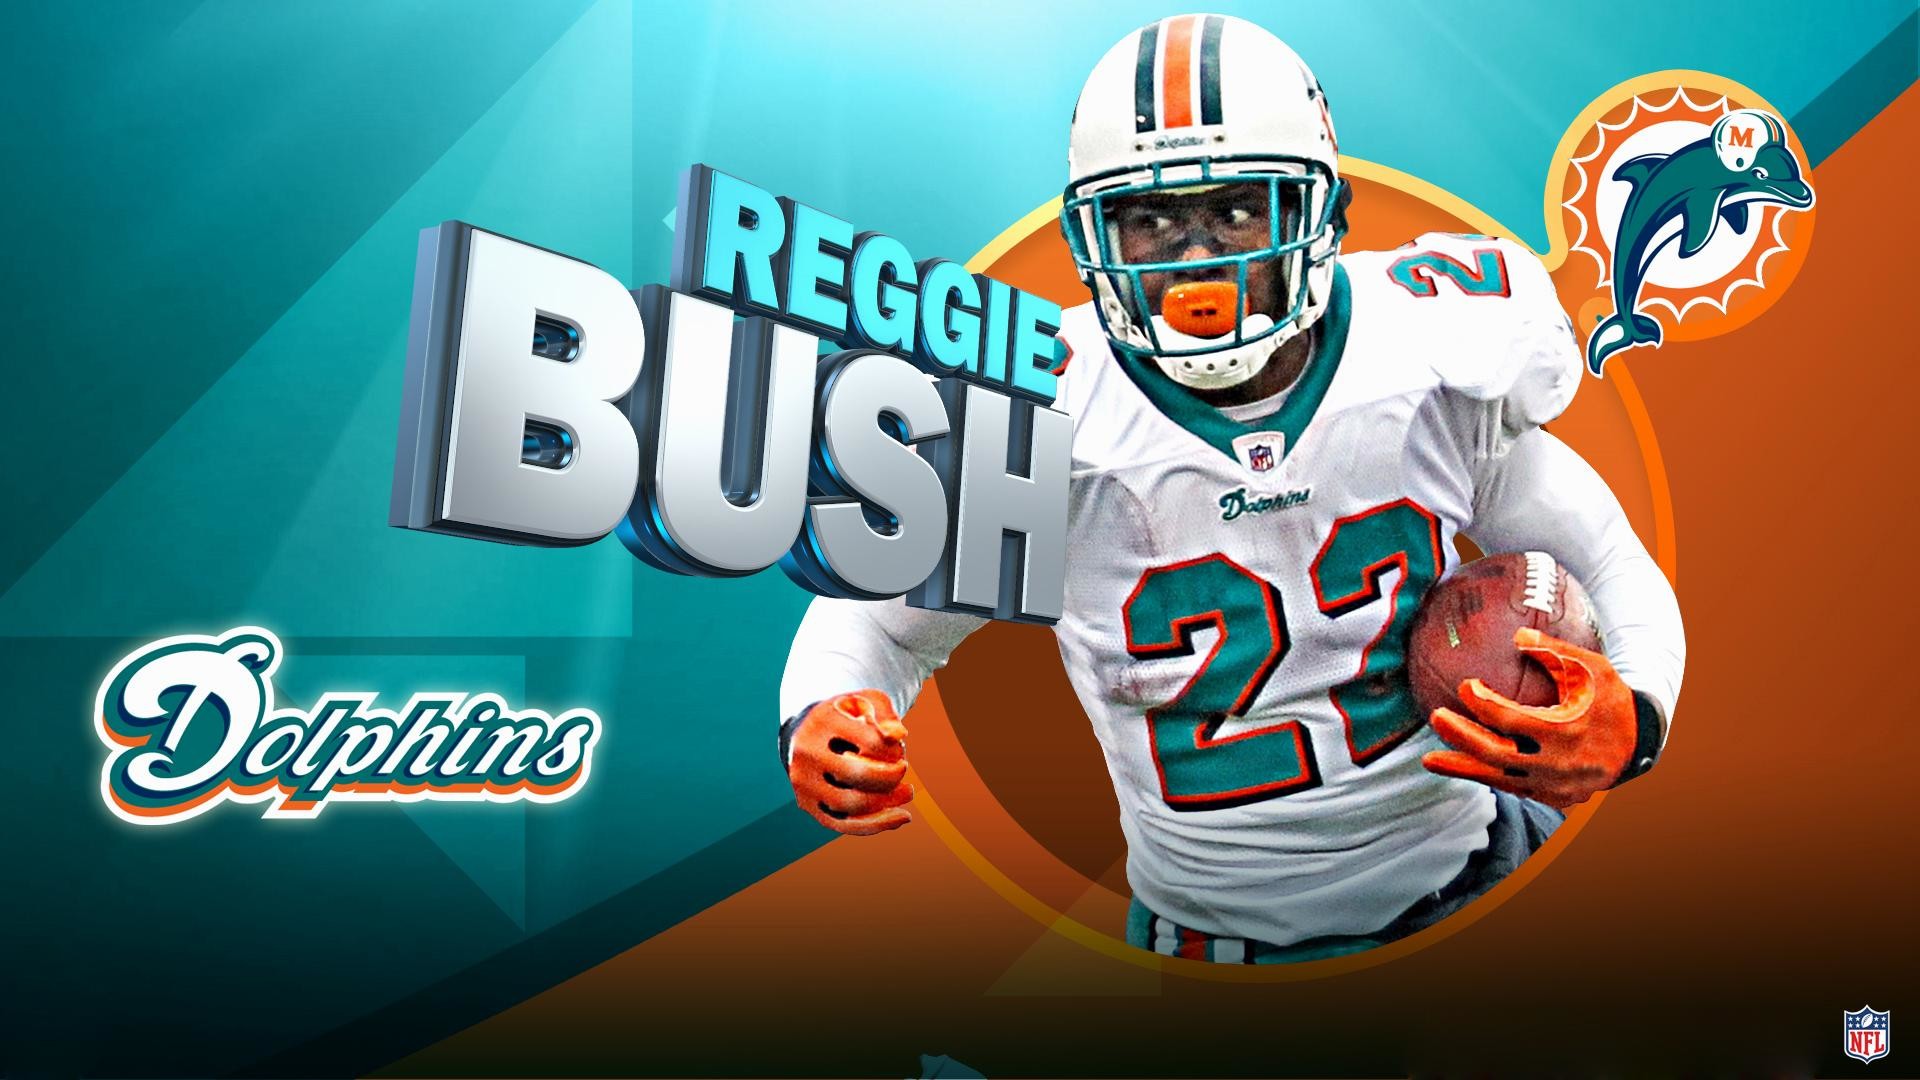 1920x1080 Wallpapers-Nfl-Miami-Dolphins-Images